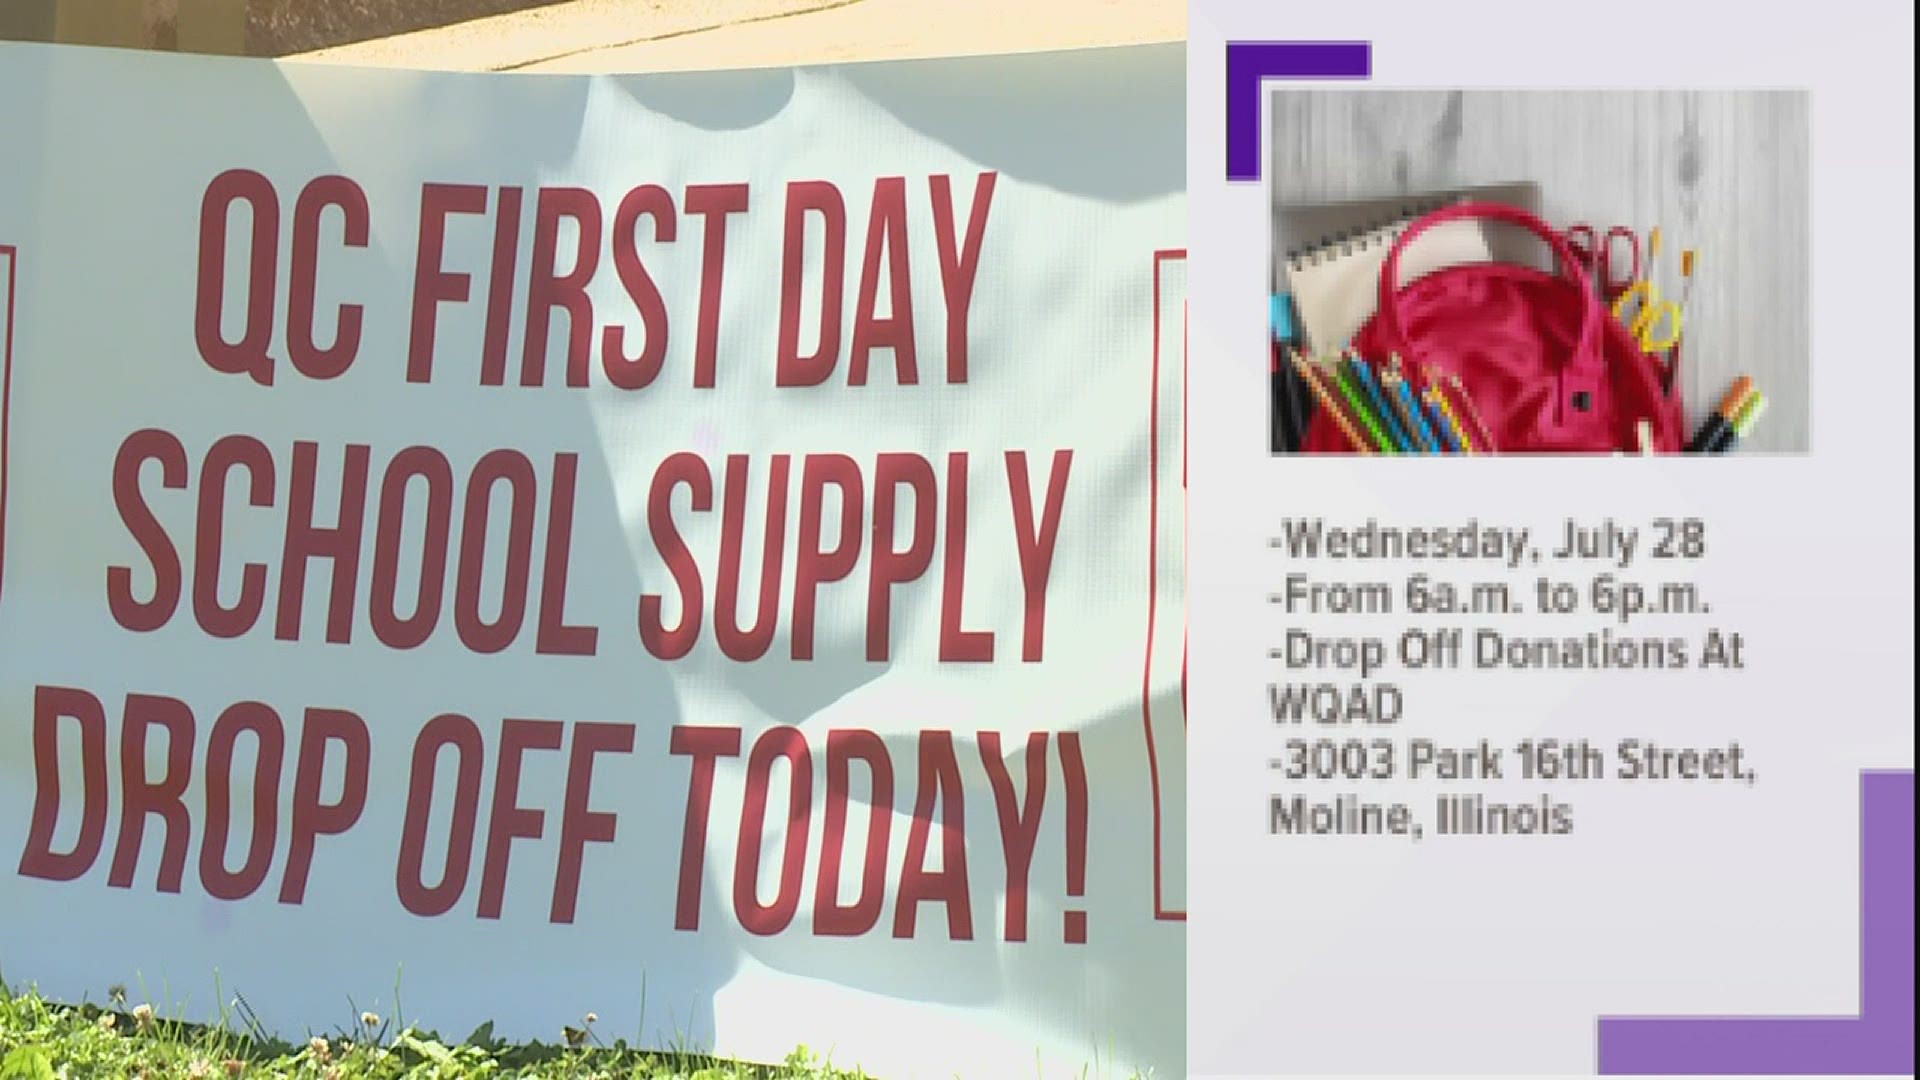 WQAD is a proud sponsor of the First Day Project.